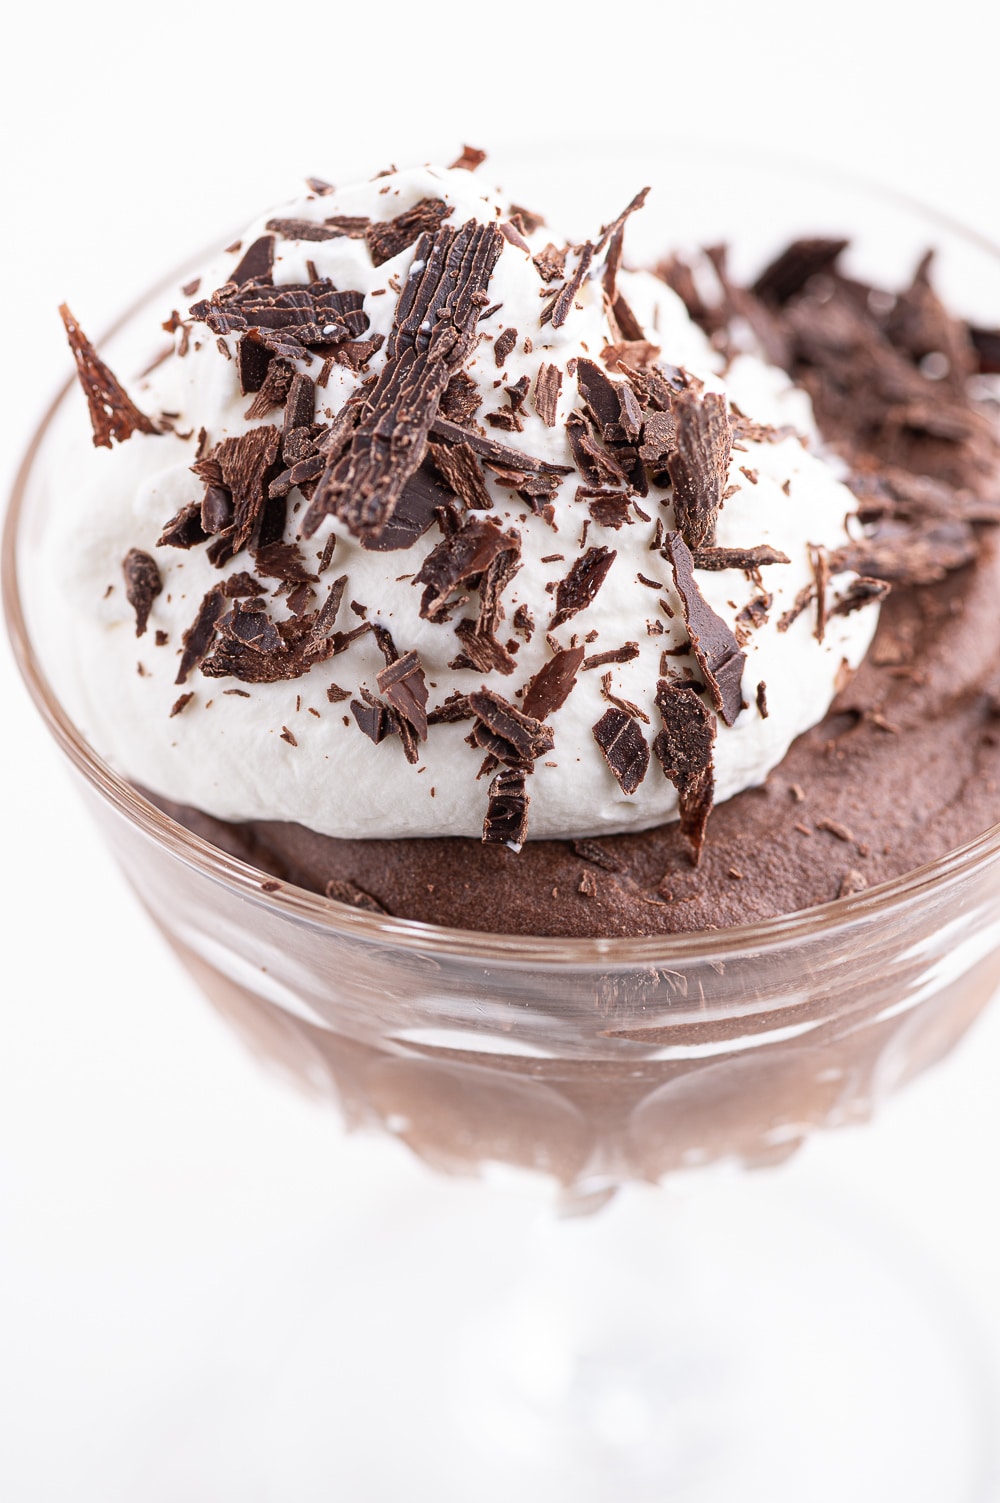 Sugar-free chocolate mousse in a glass dish with a dollop of whipped cream and dark chocolate shavings. 